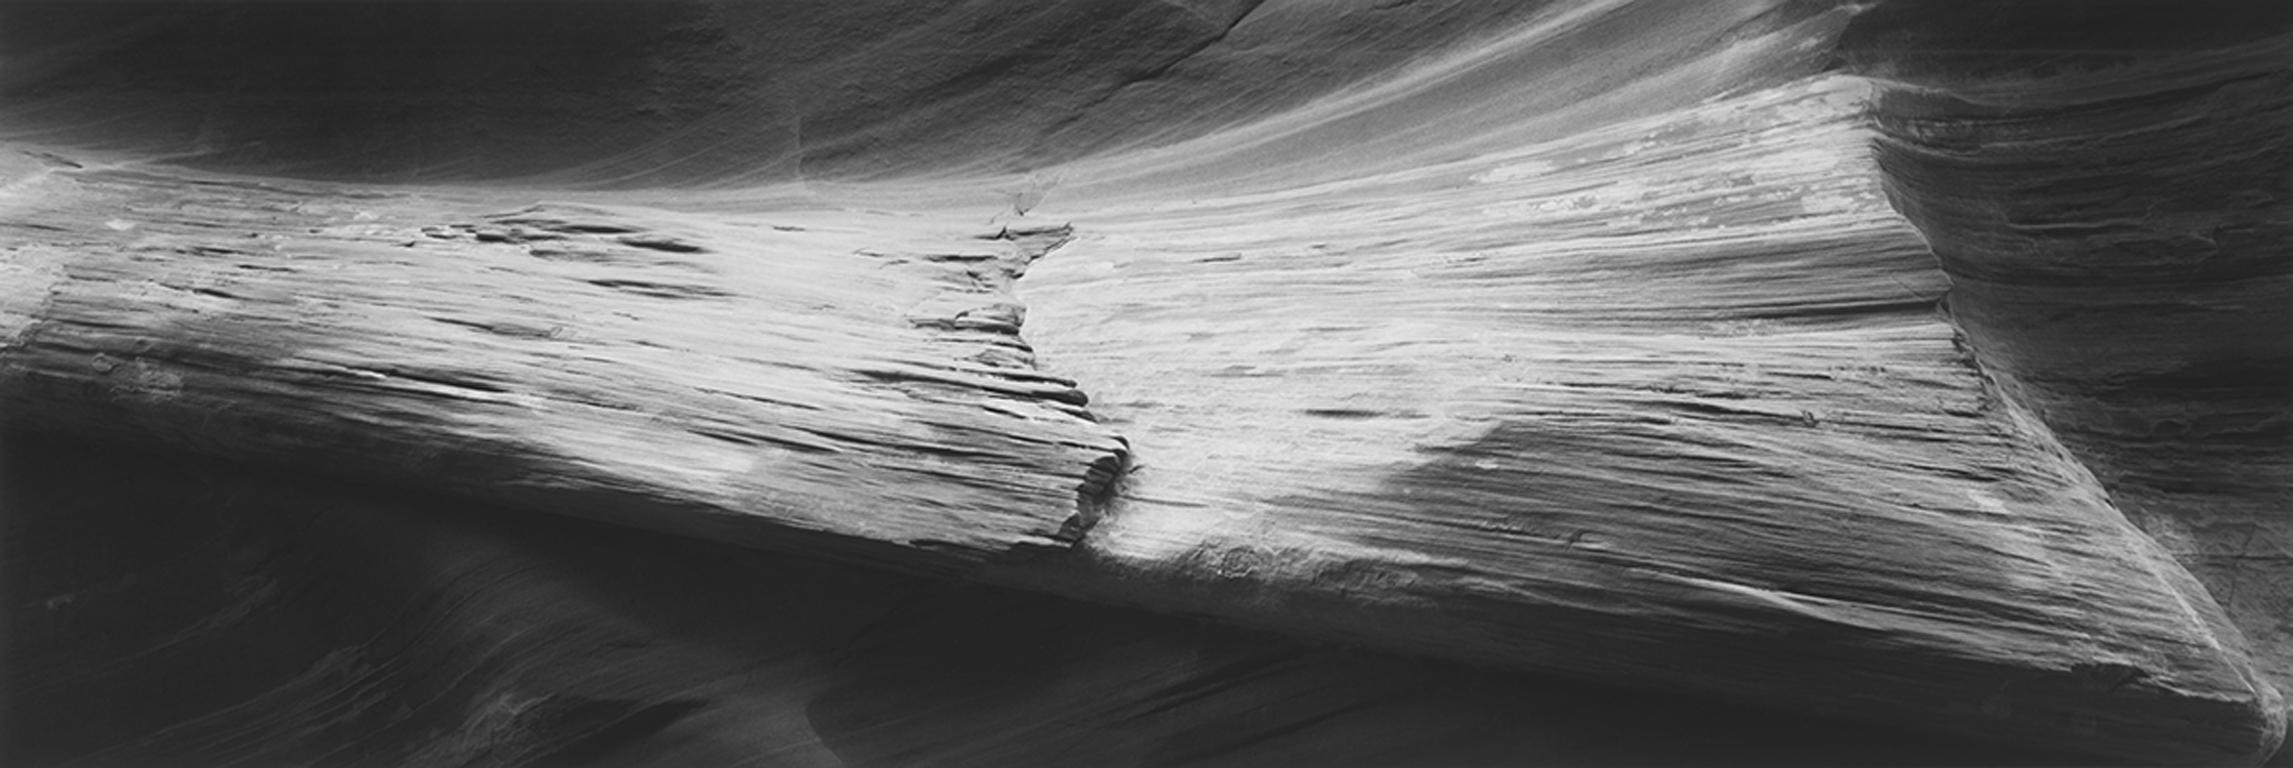 David H. Gibson Black and White Photograph - Silent Sound, Sandstone Formation, Page, Arizona